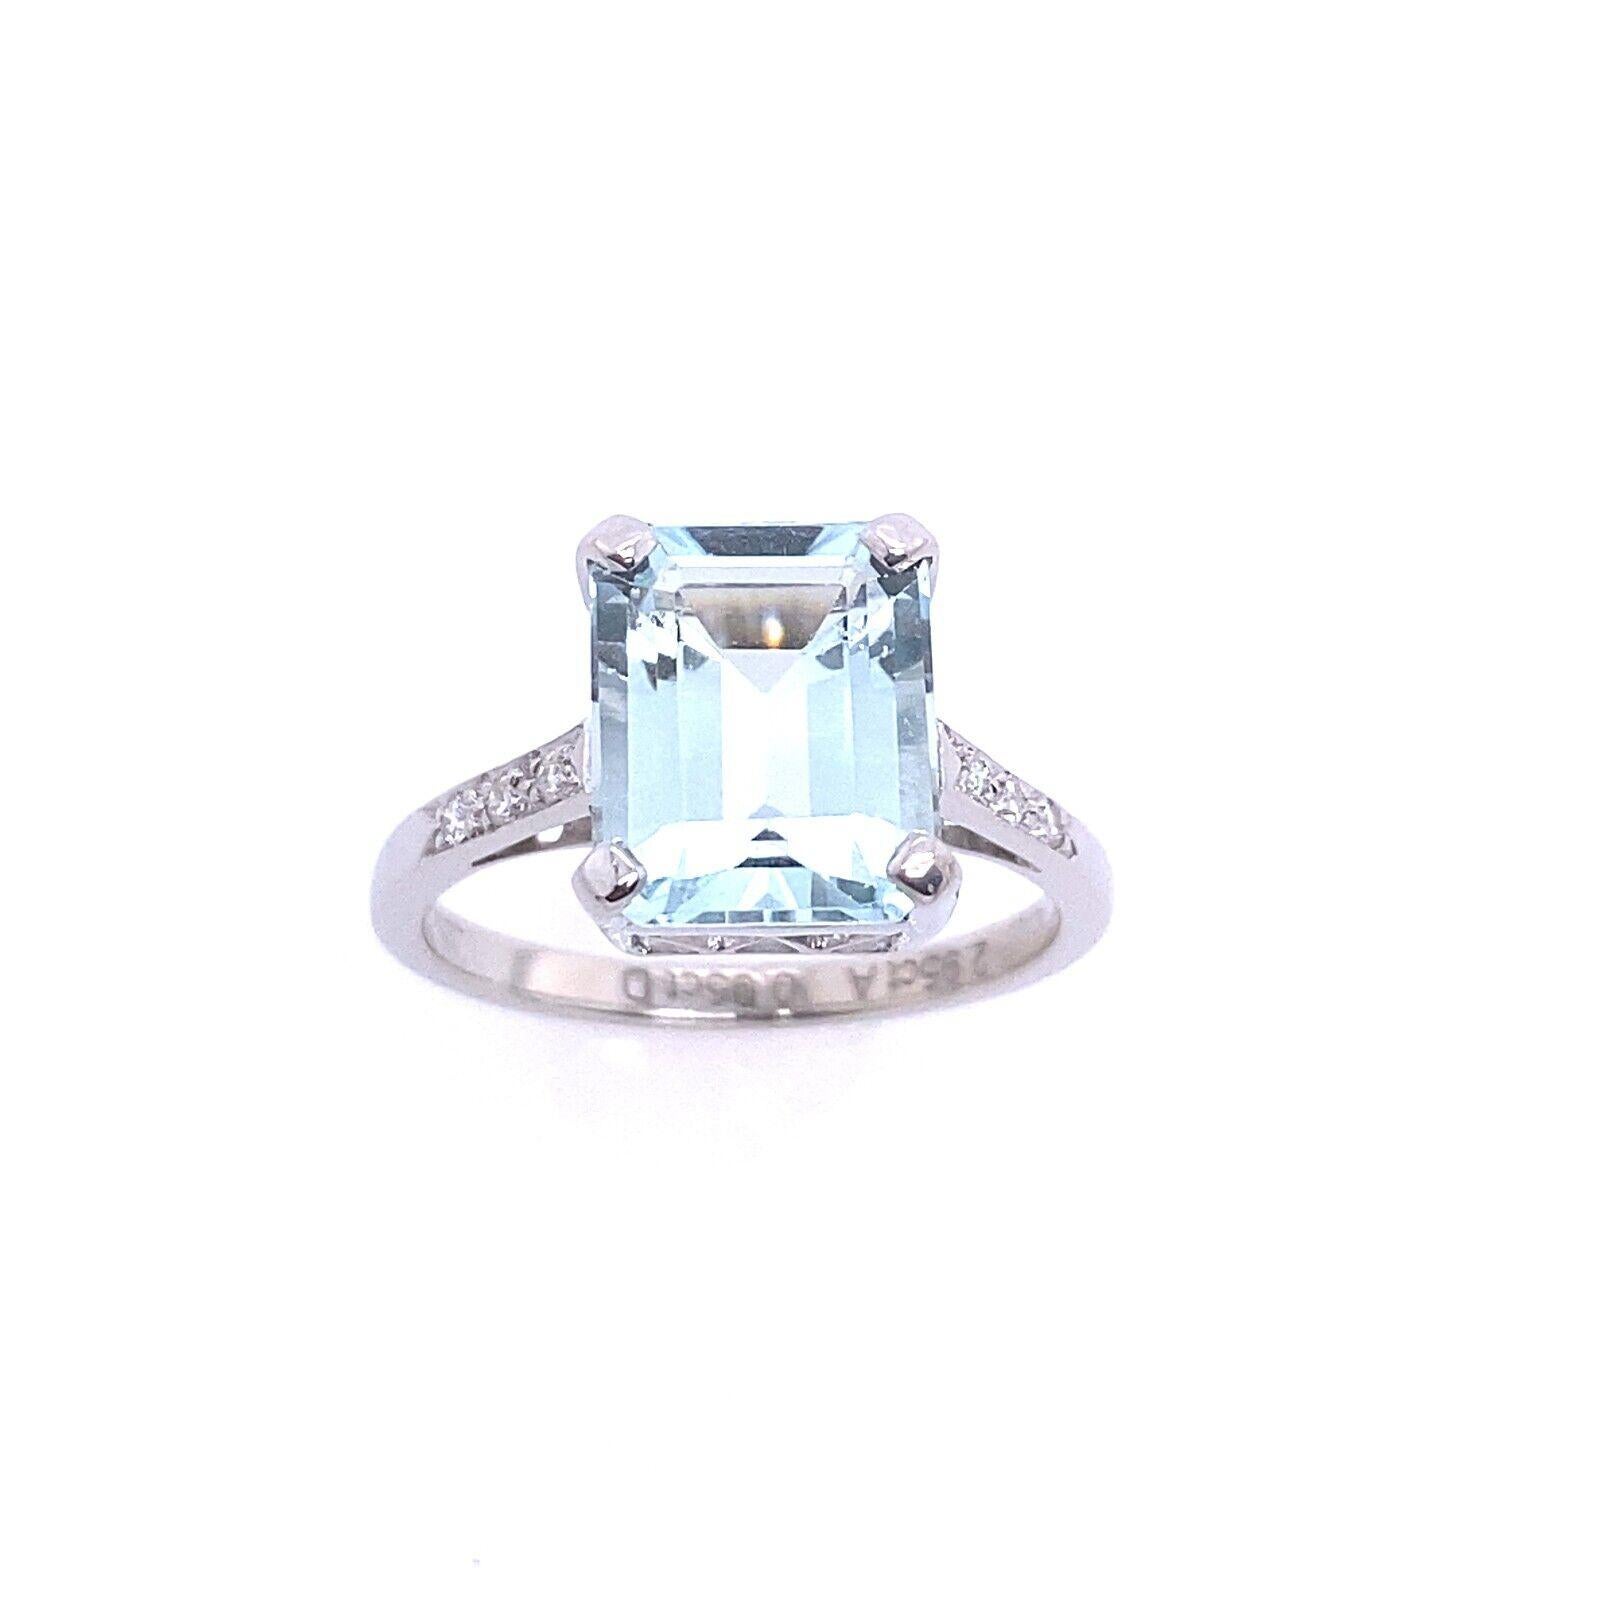 2.95ct Emerald Cut Aquamarine Set in 18ct White Gold Ring with Diamonds For Sale 2